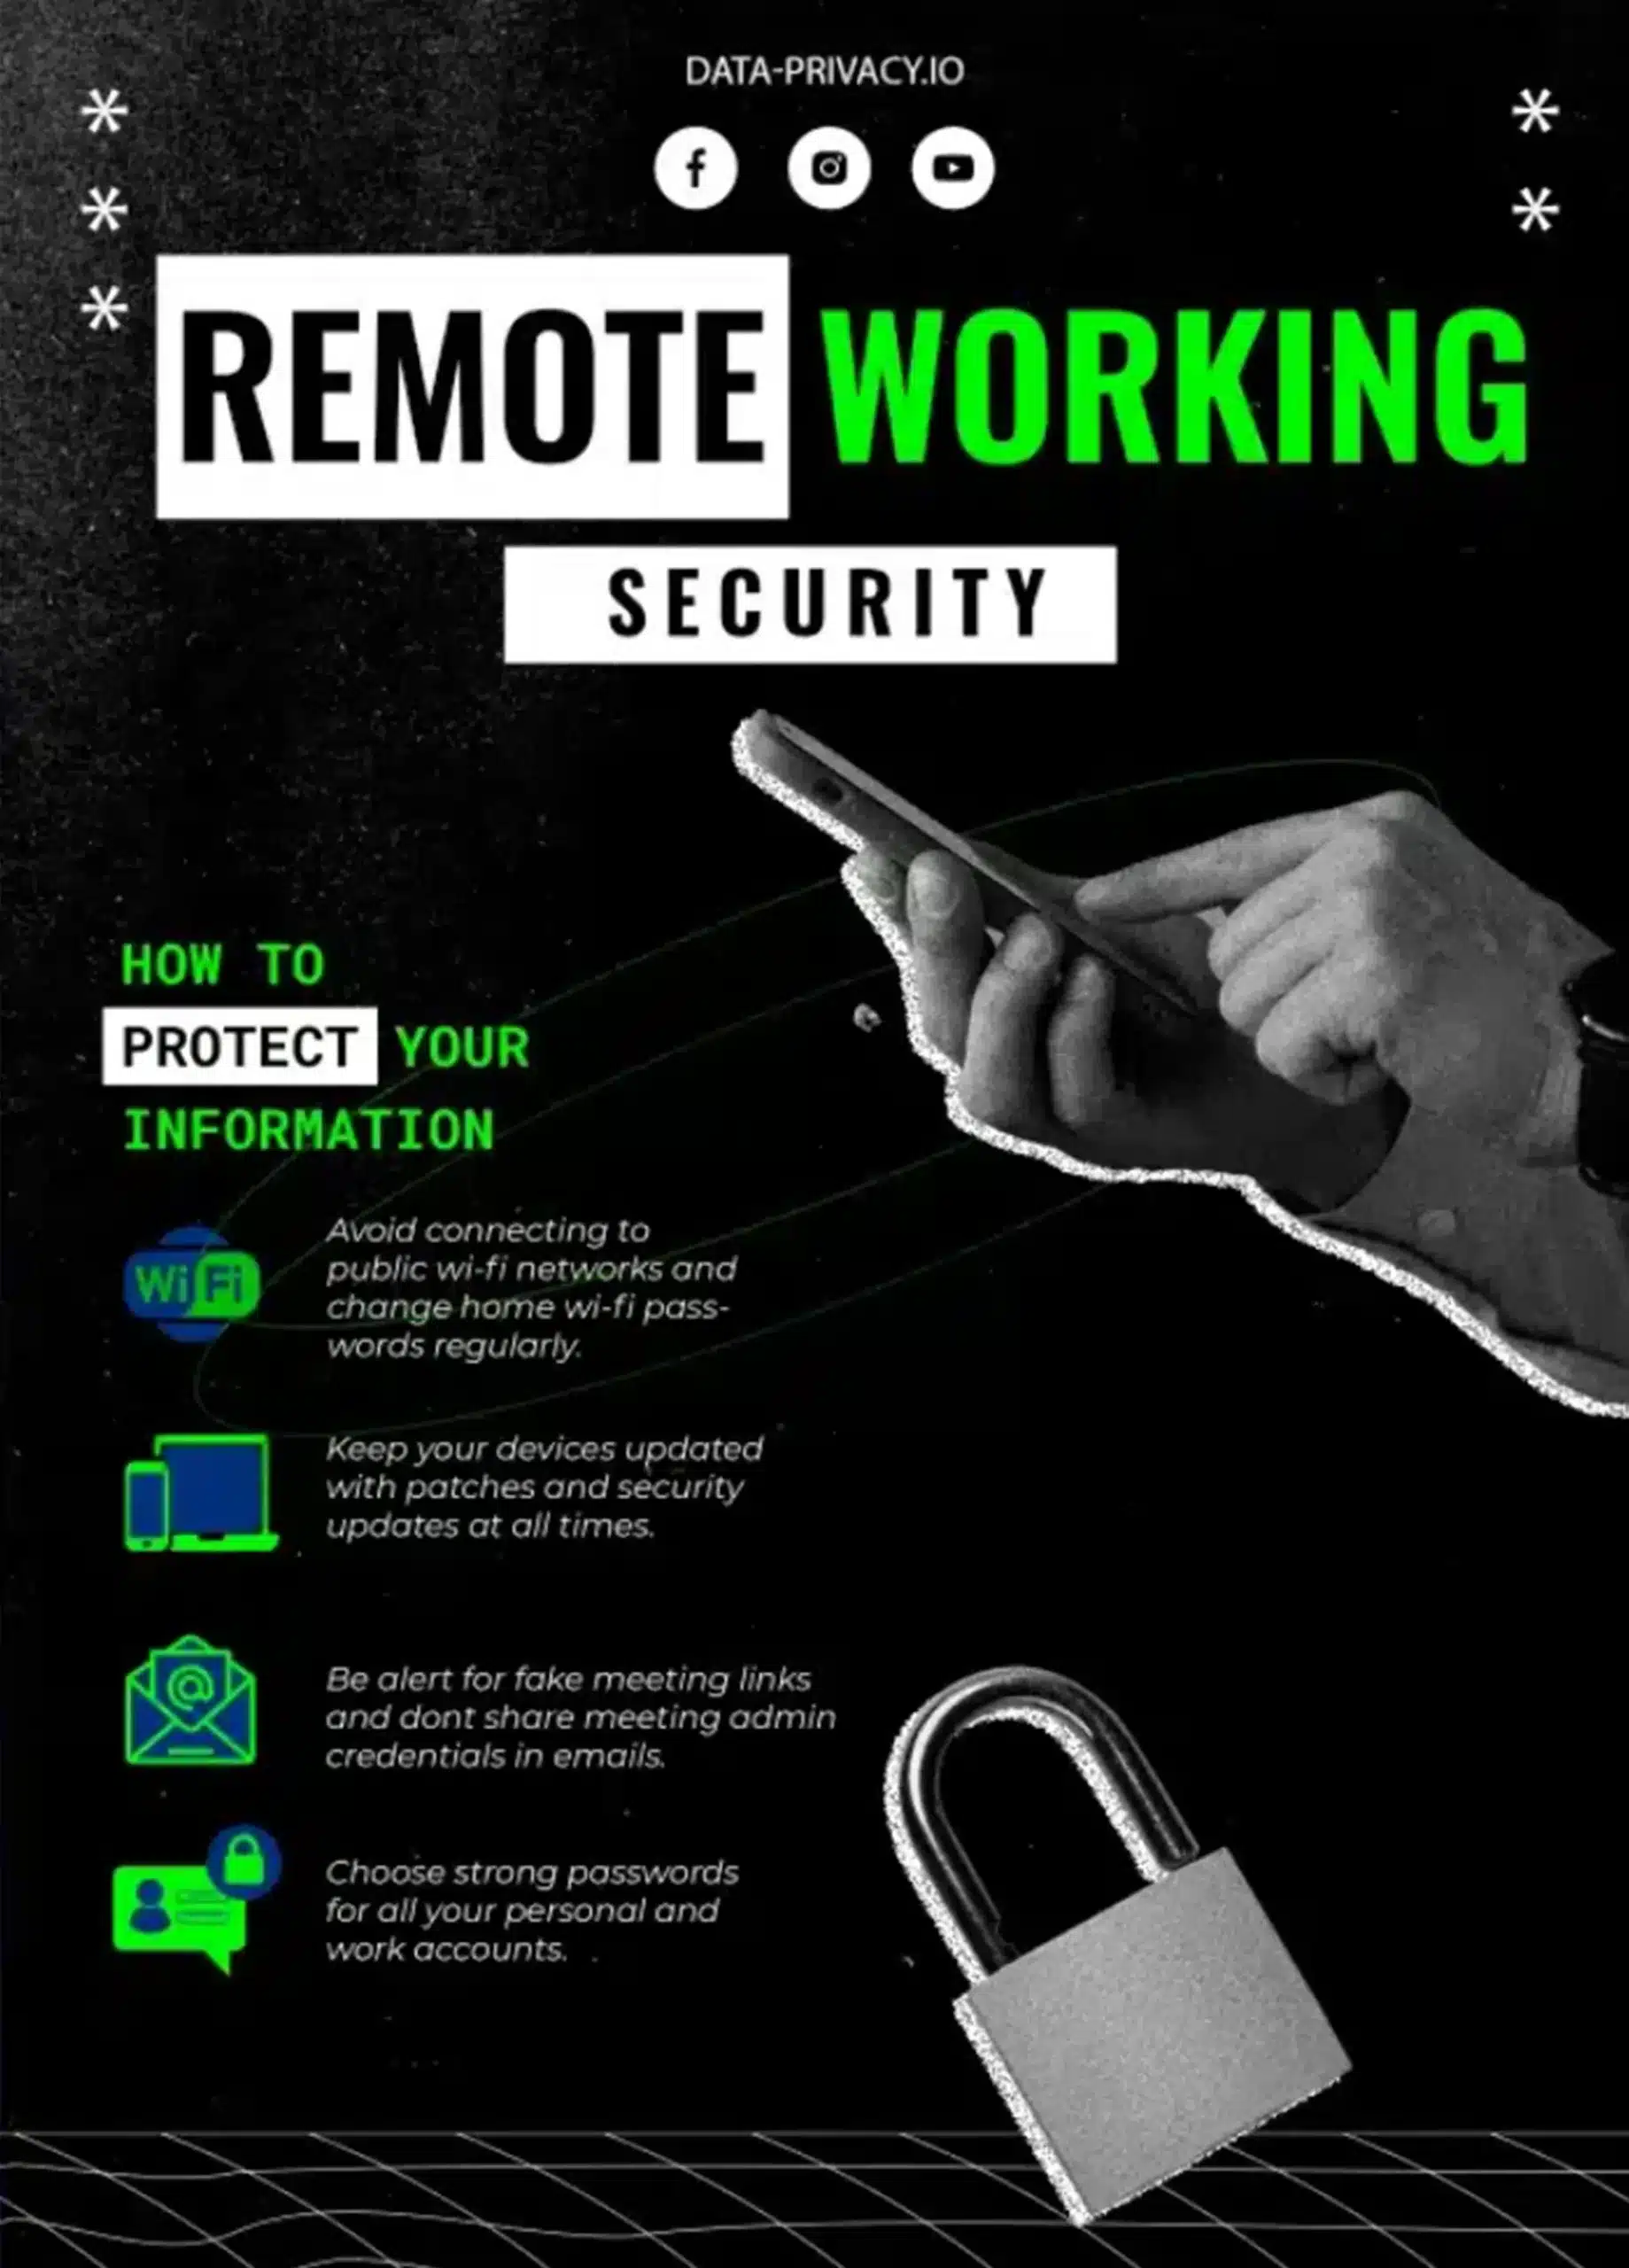 Free remote working security awareness tips poster